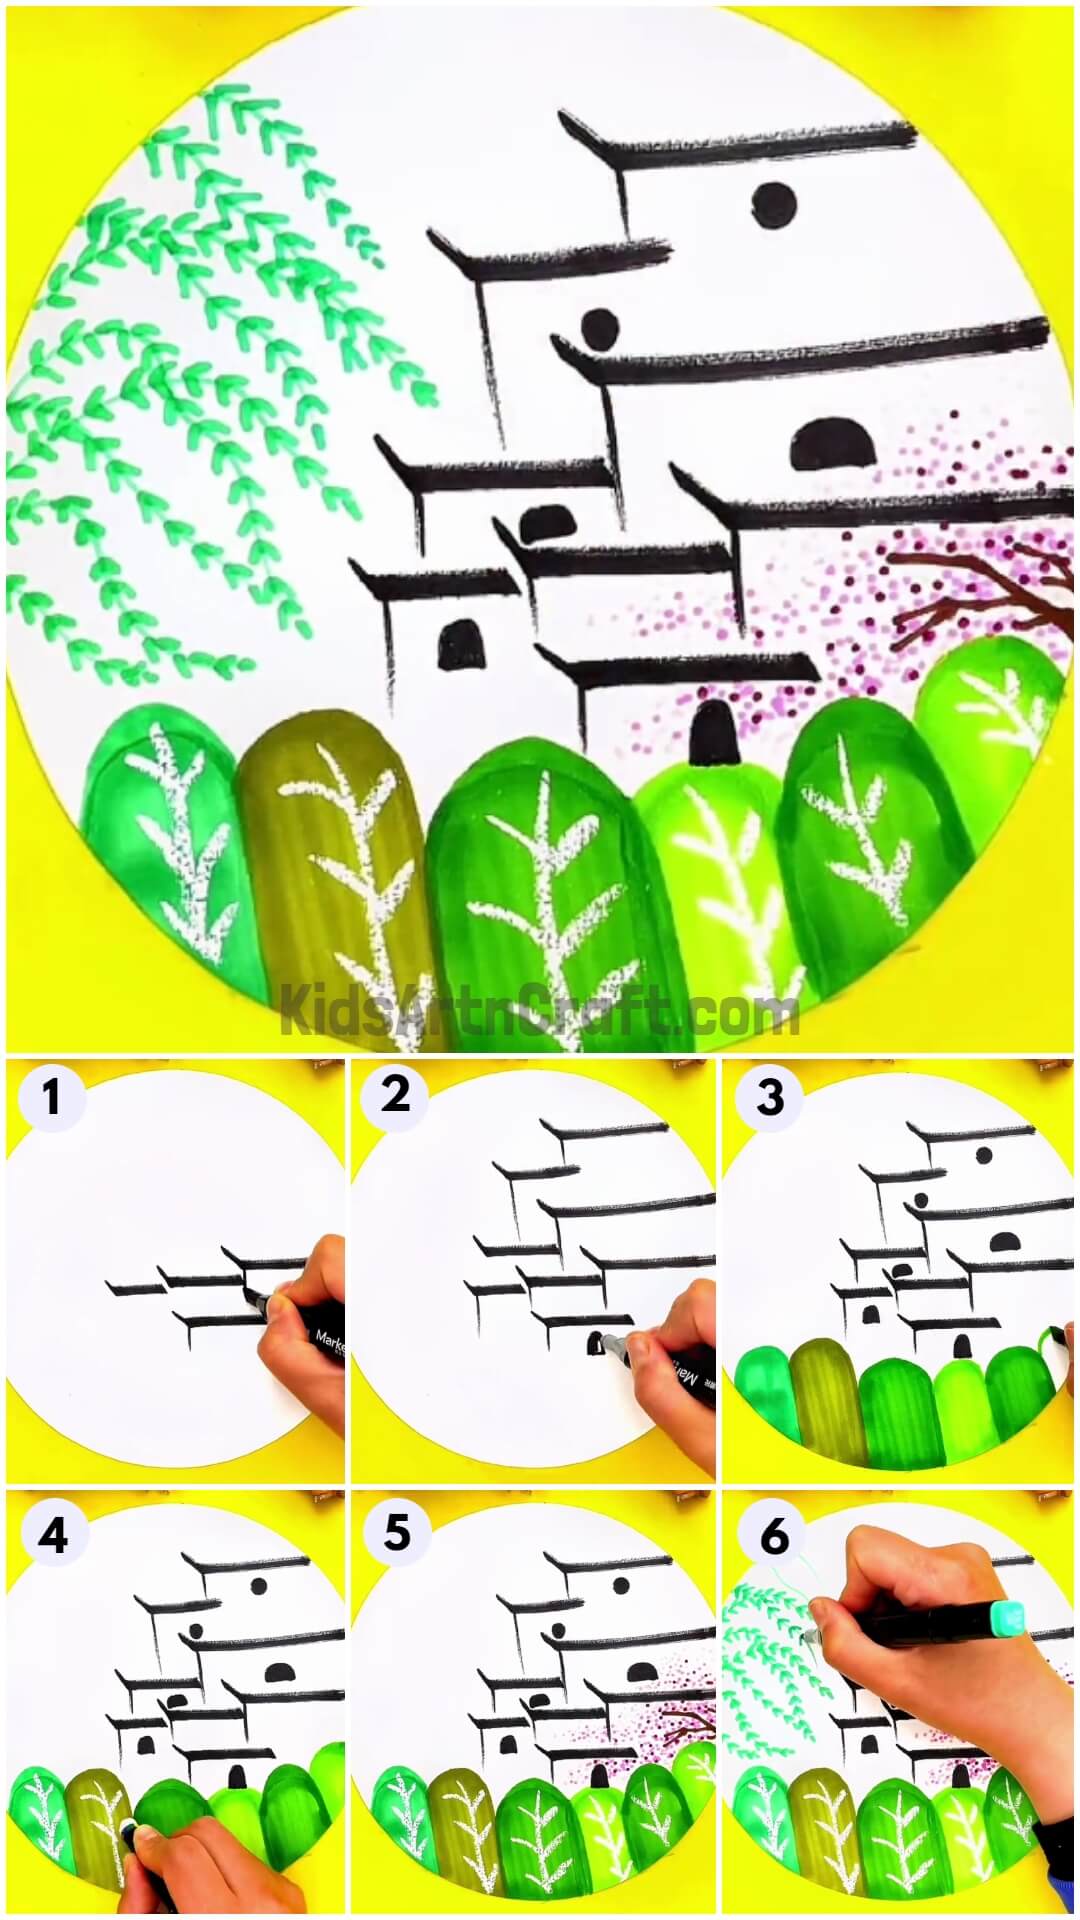 Easy Town Landscape Step-by-step Drawing For Kids